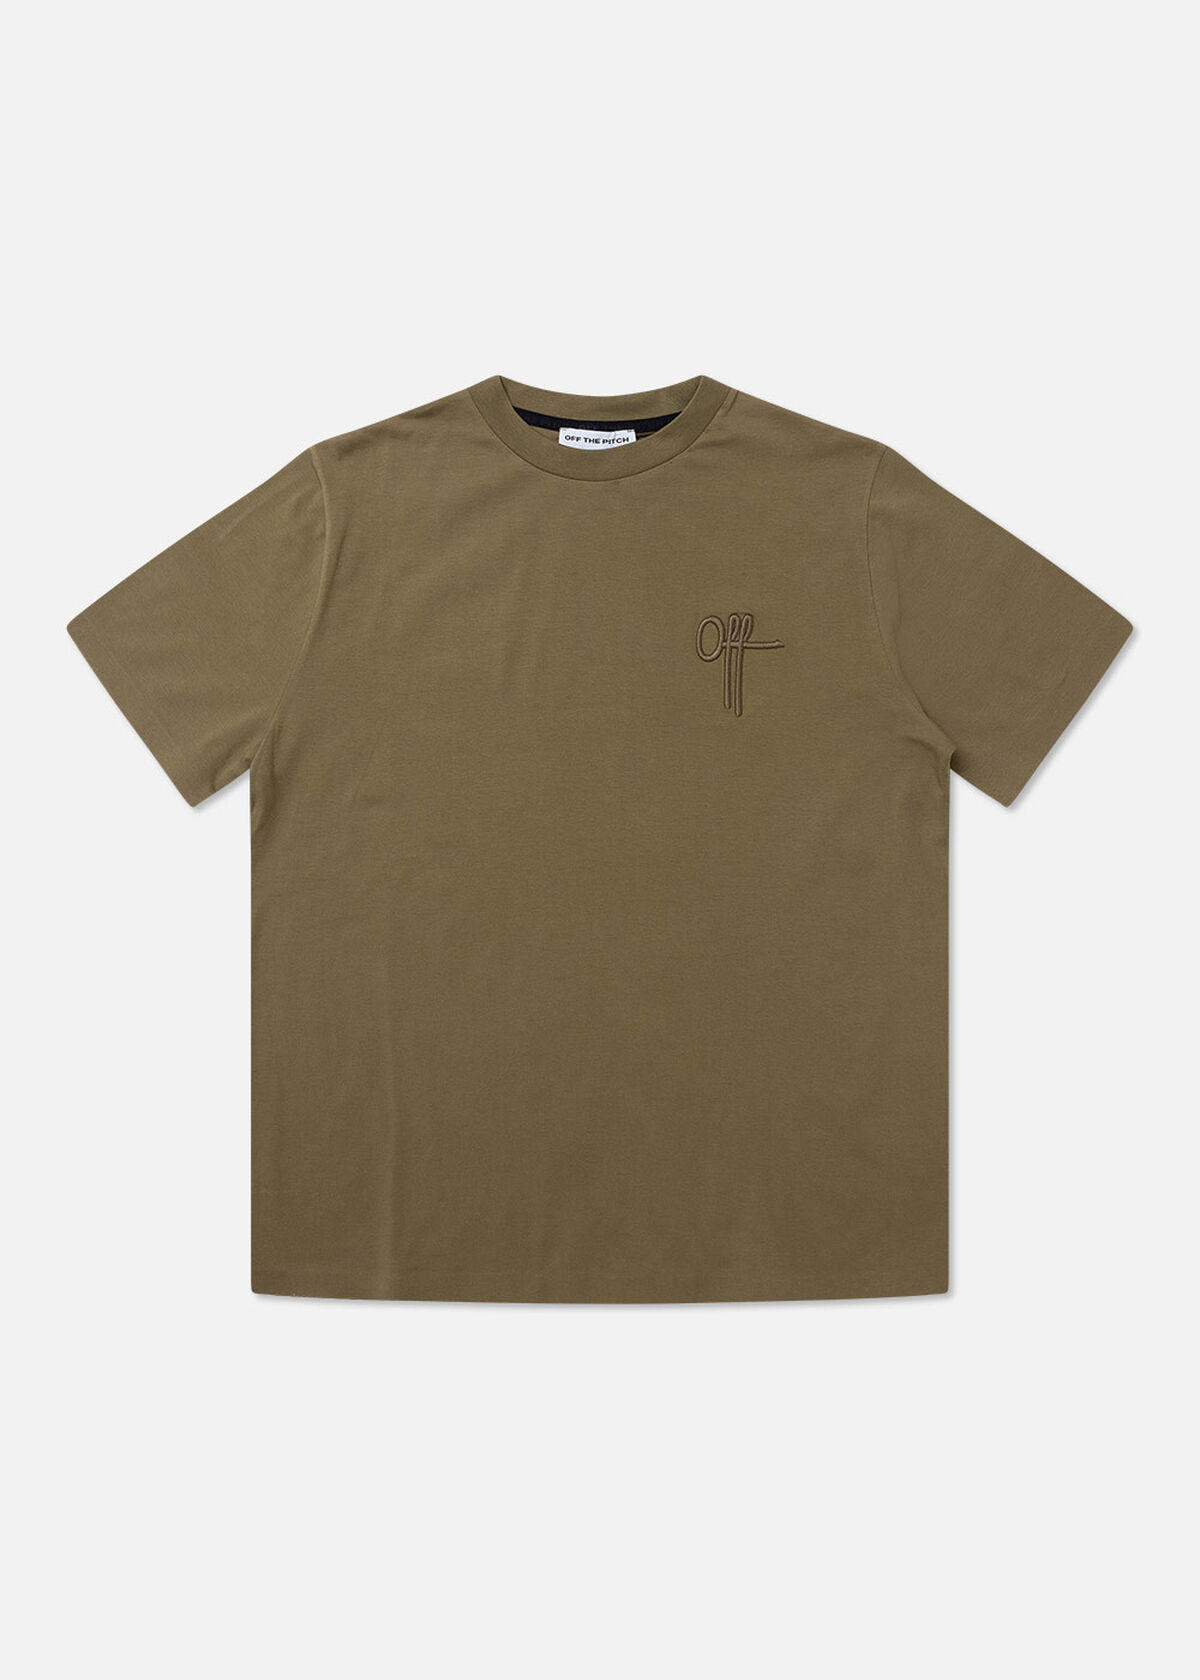 Evergreen Tee Regular Fit, Army green, hi-res